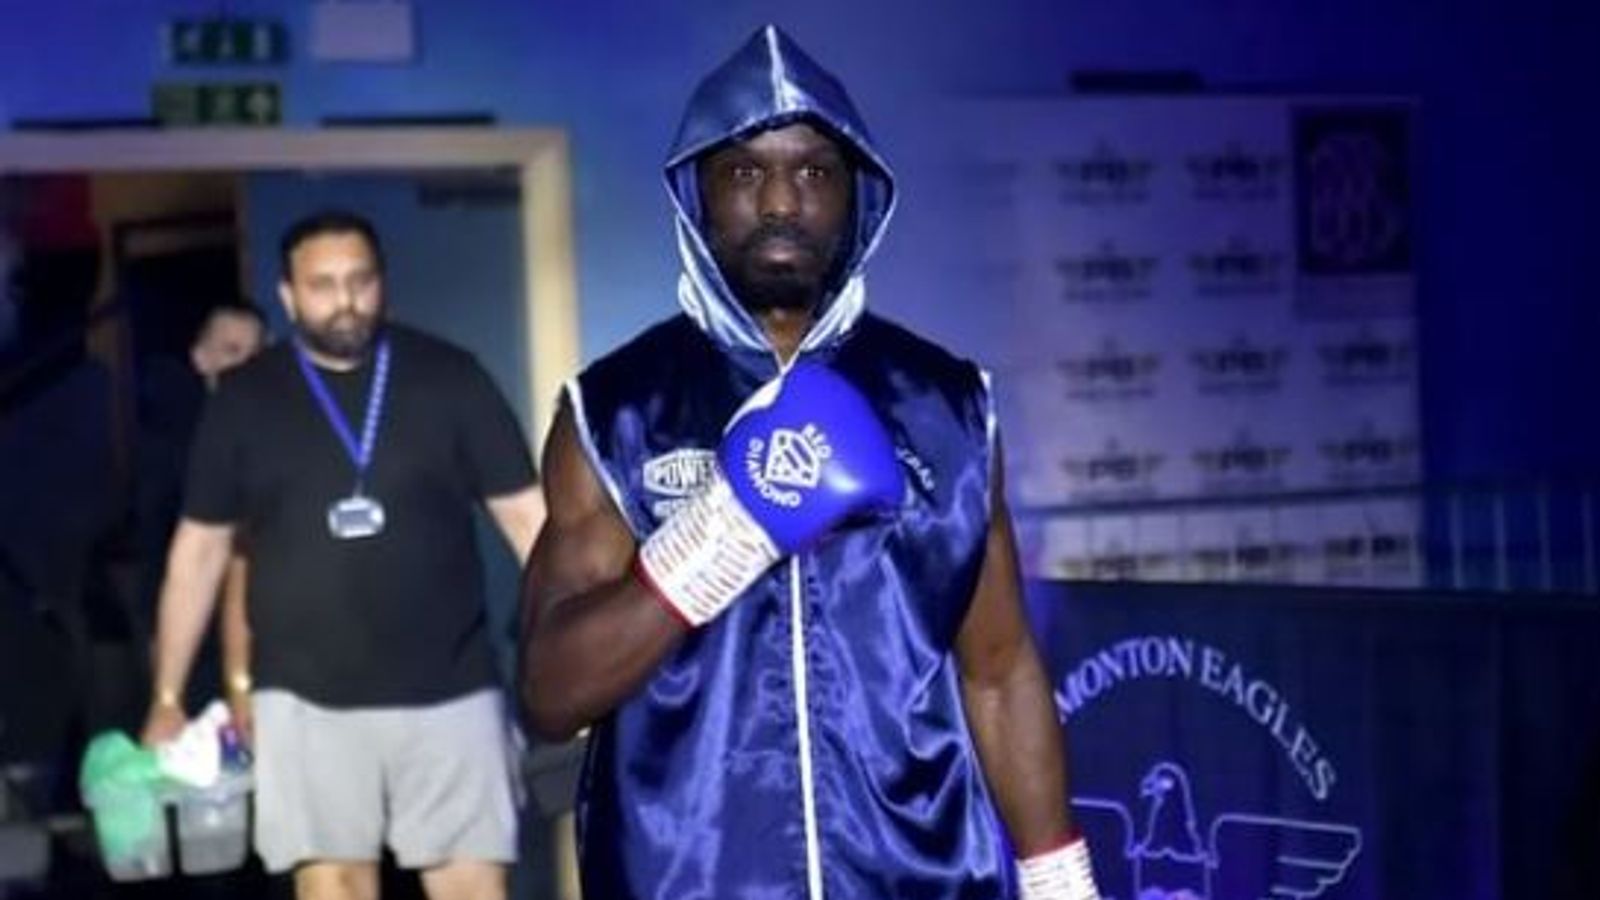 UK-based boxer dies after being knocked down during professional debut